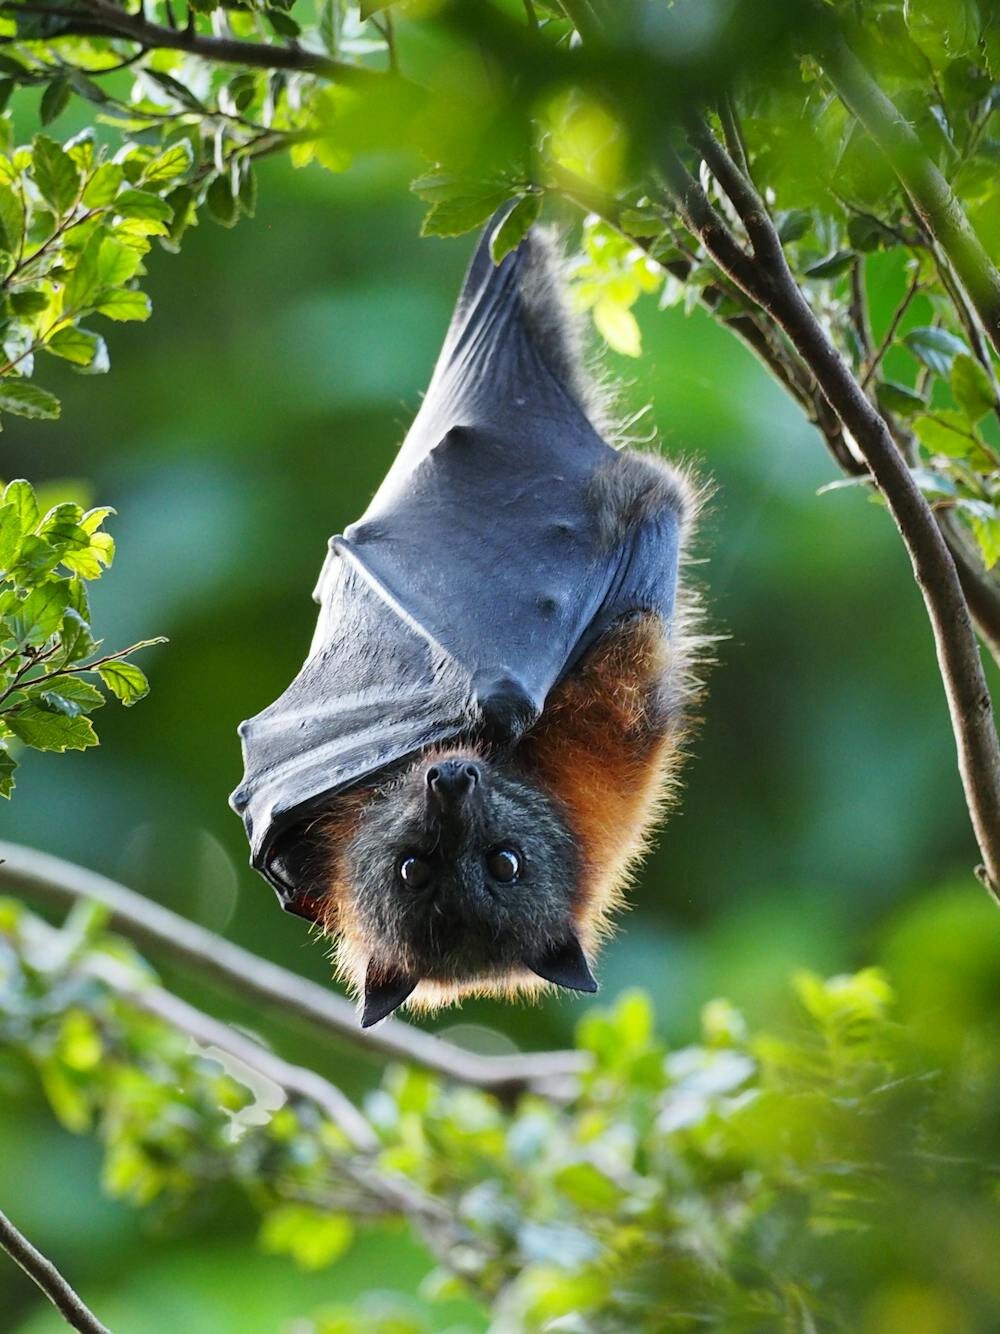 Gray-headed flying-fox population is stable—10 years of monitoring reveals this threatened species is doing well